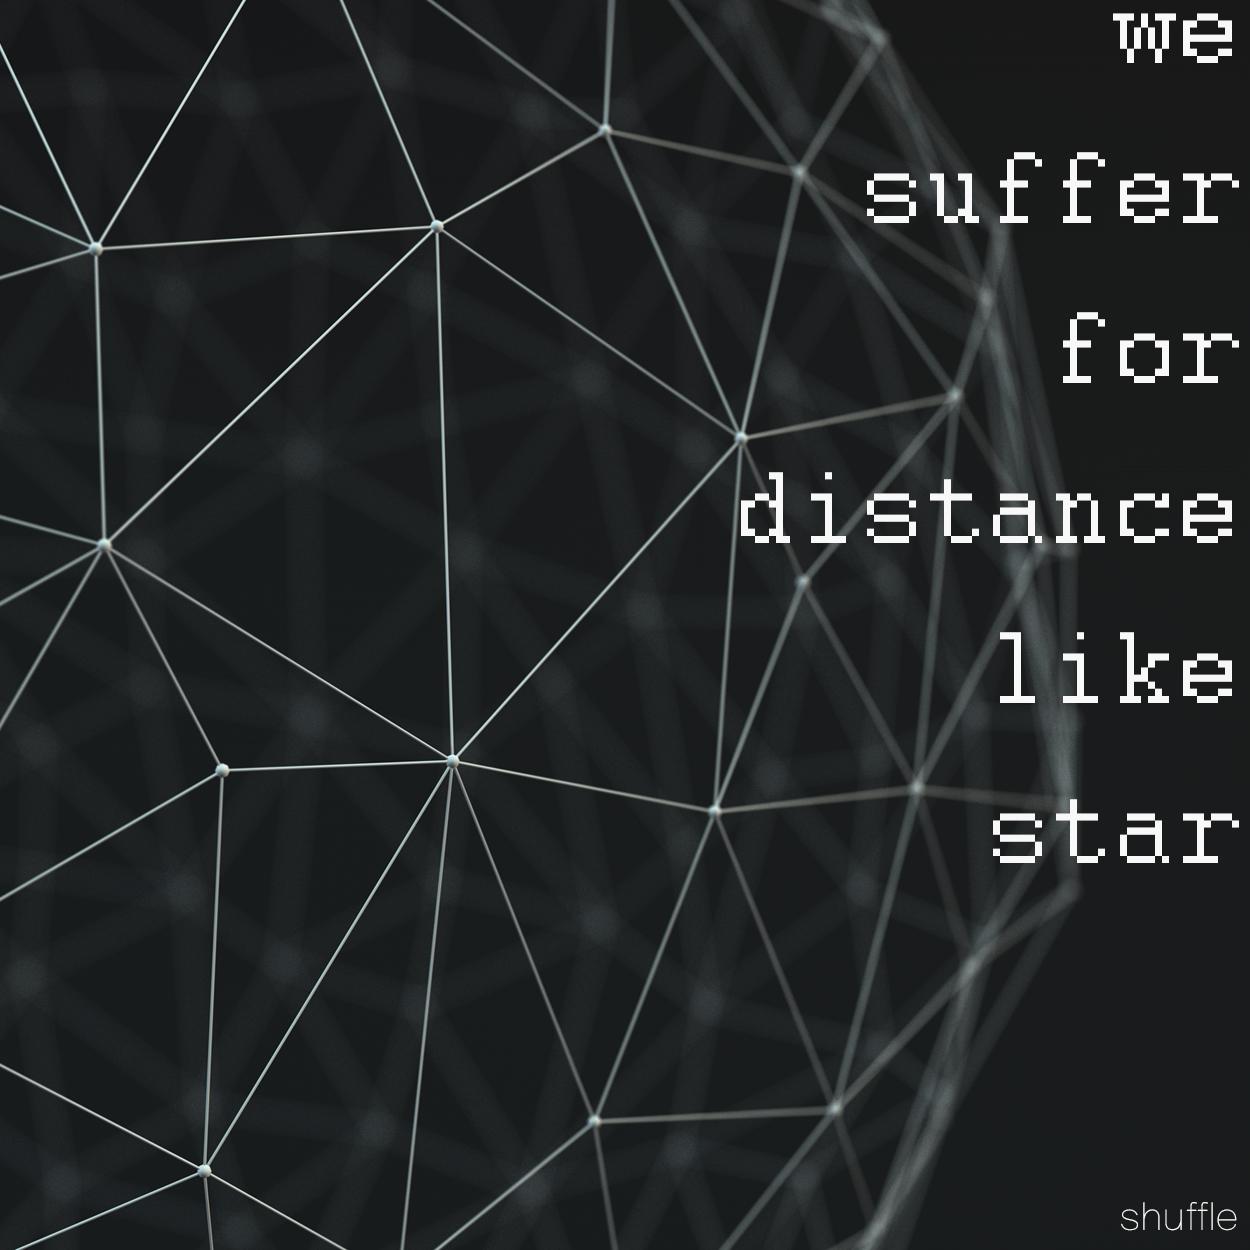 we suffer for distance like star专辑